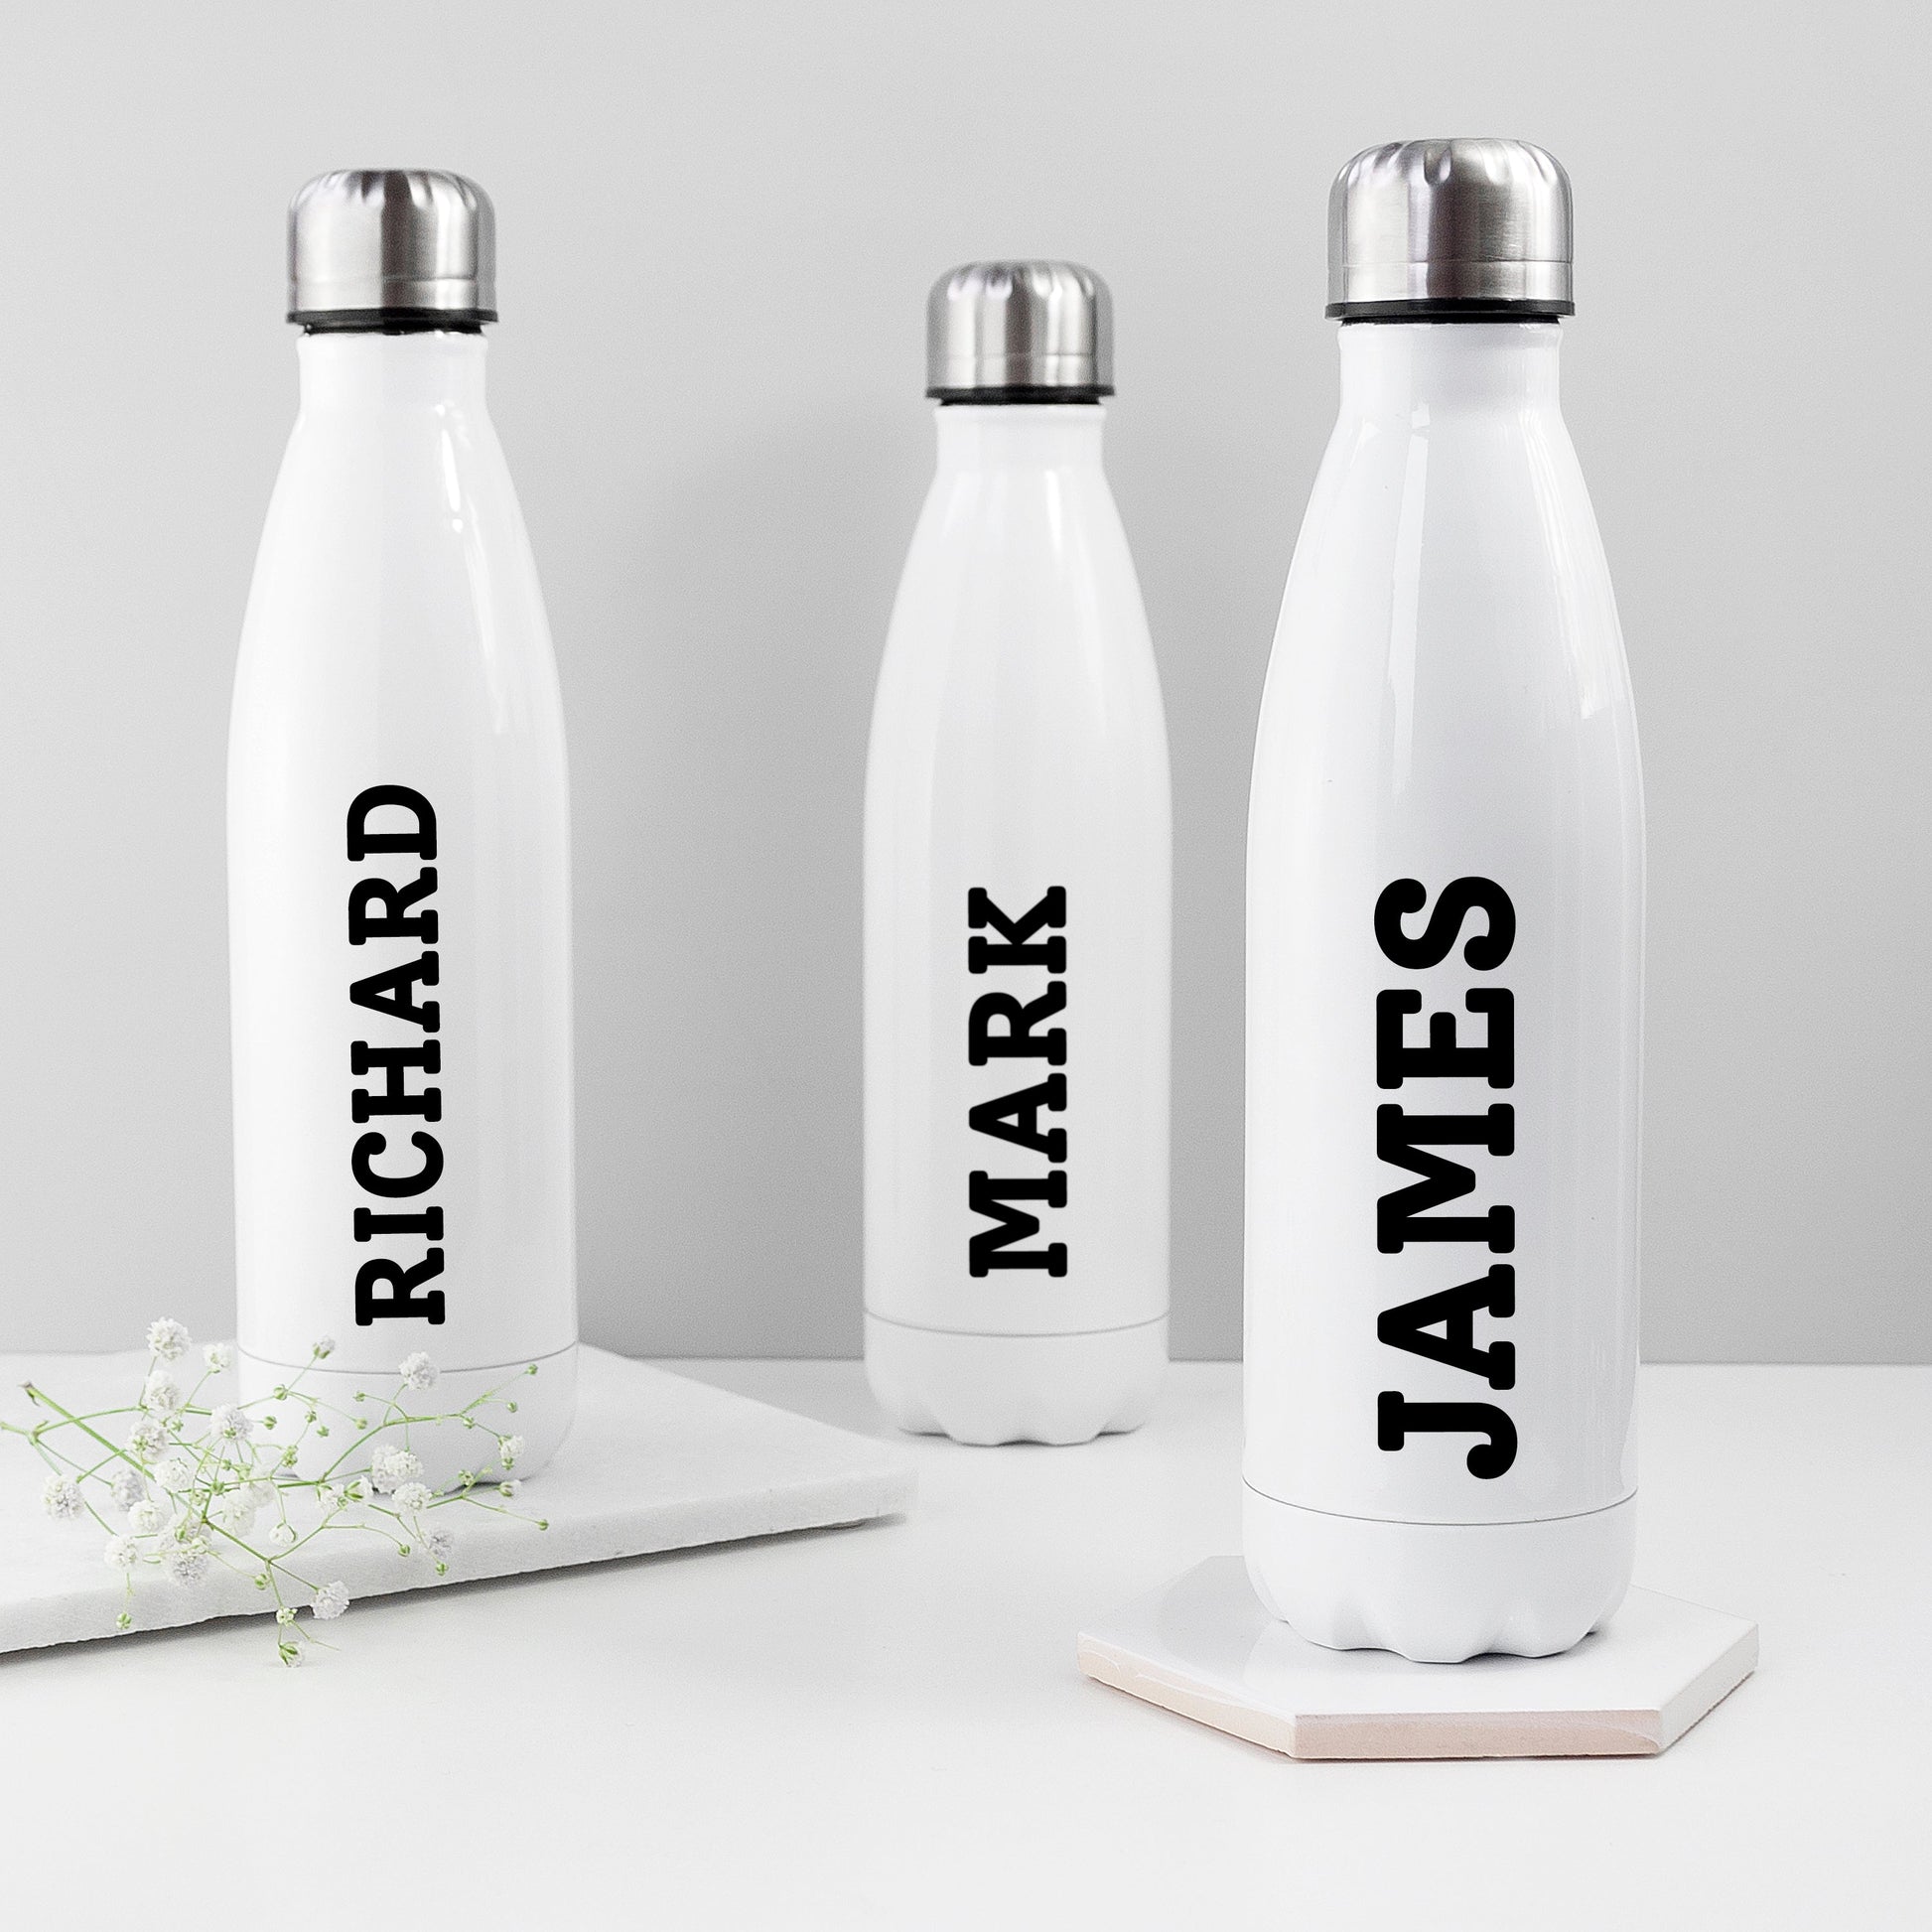 Personalized Water Bottles - Personalized White Water Bottle 